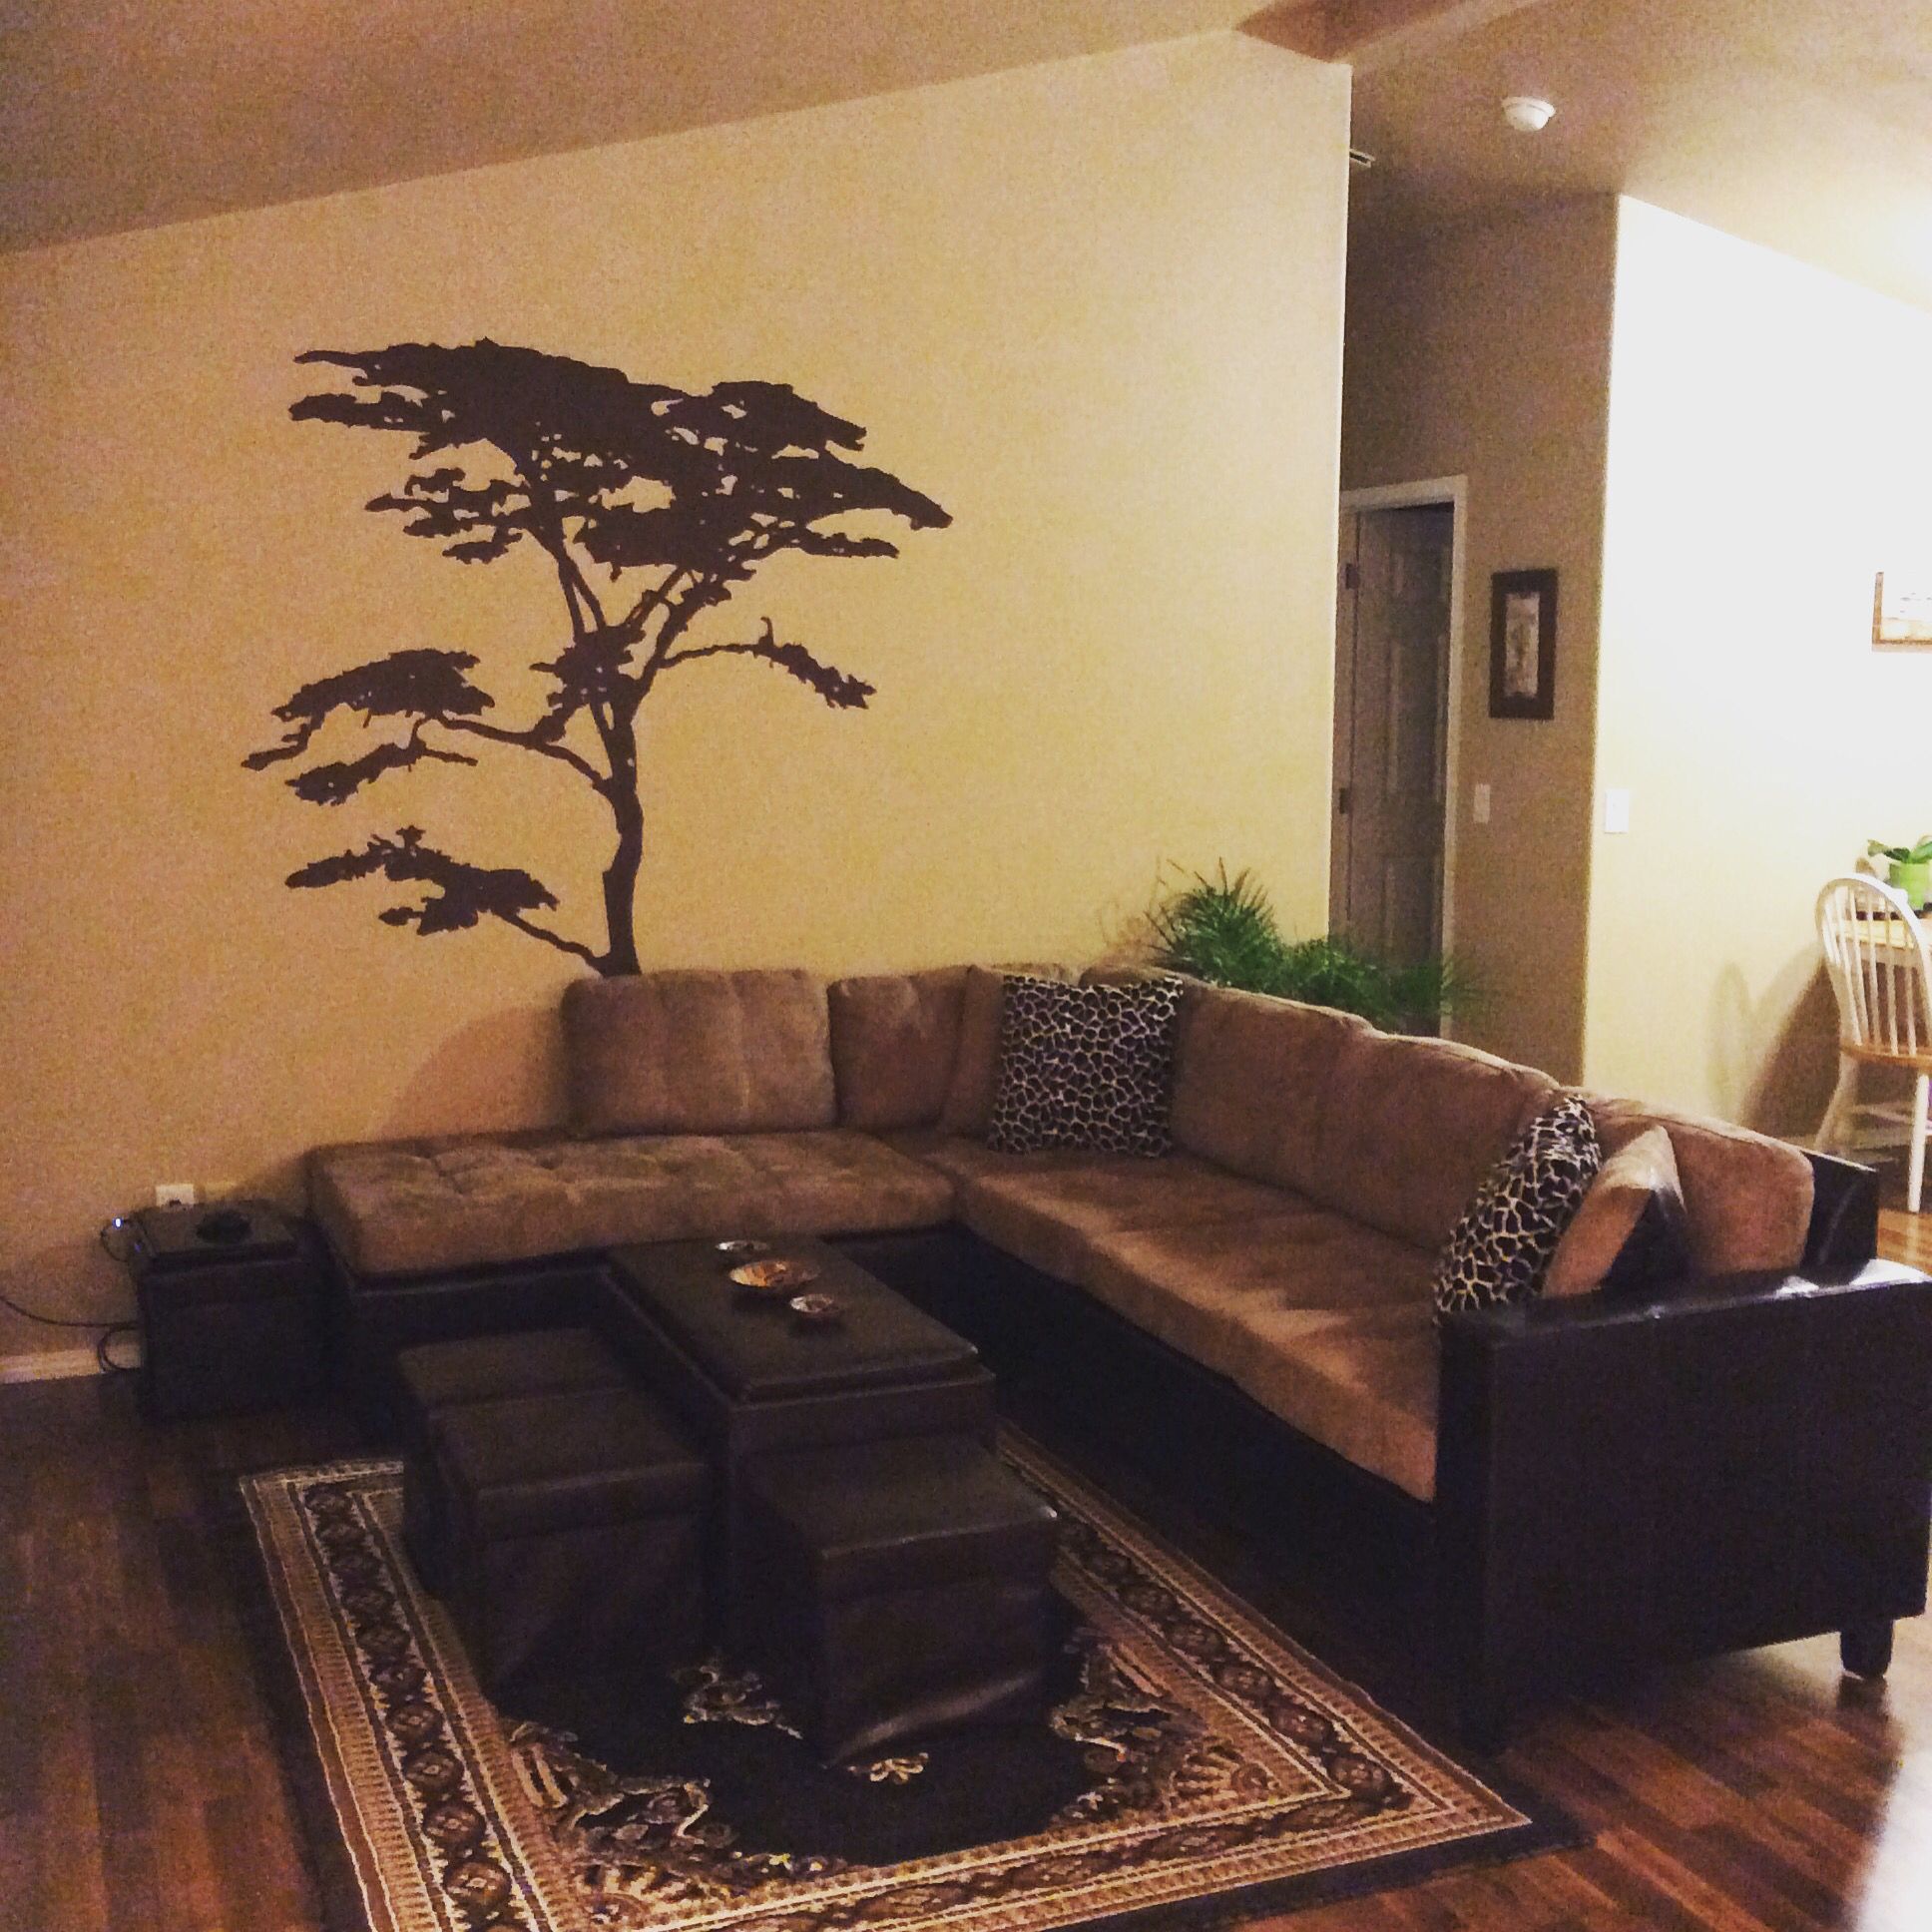 Acacia Tree Decali Like It!! | Tree Decals, Home Decor, Sectional Couch In Newest Acacia Tree Wall Art (View 19 of 20)